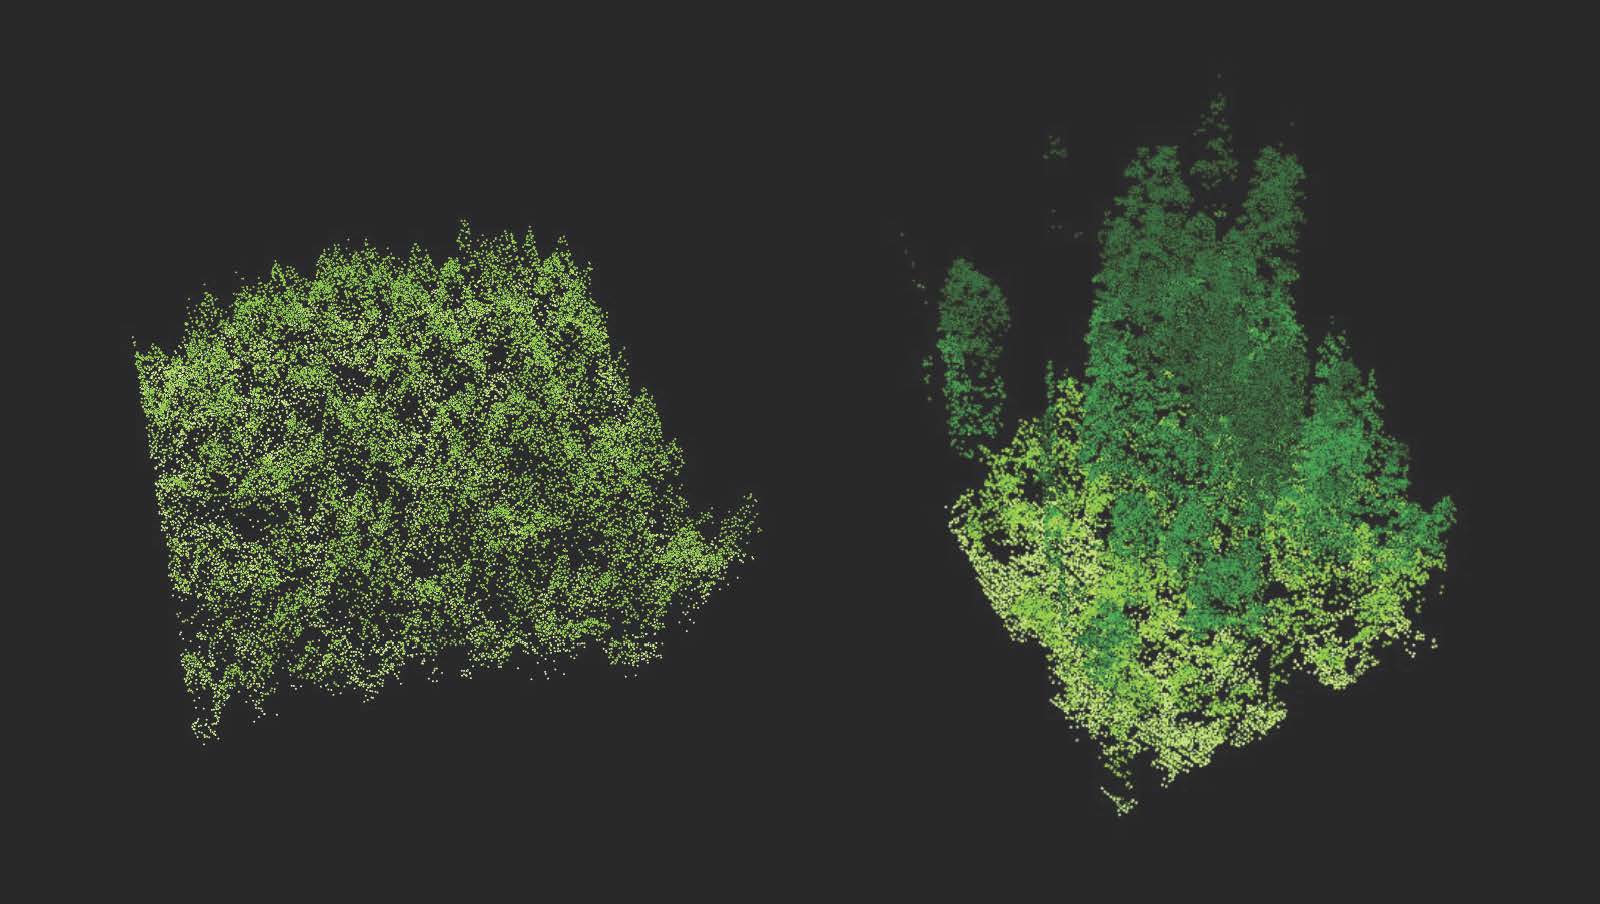 A LIDAR scan of a forest.